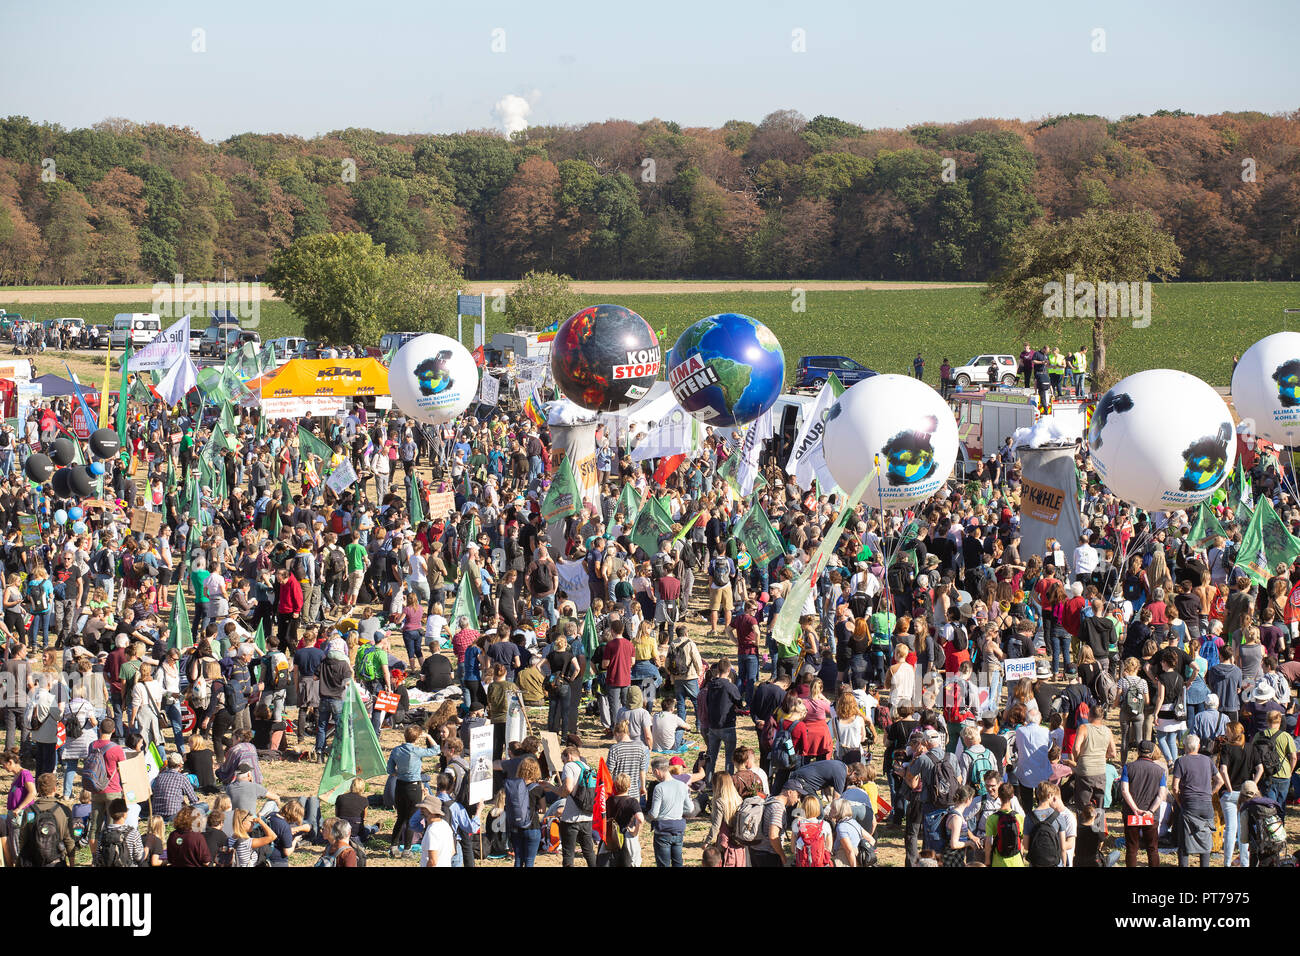 Hambacher, Germany. 6th October 2018. On Saturday (06.10.18) 50,000 people protested with banners, posters and balloons at the Hambacher Forst near Cologne for more climate protection and against lignite mining. Credit: Guido Schiefer/Alamy Live News Stock Photo